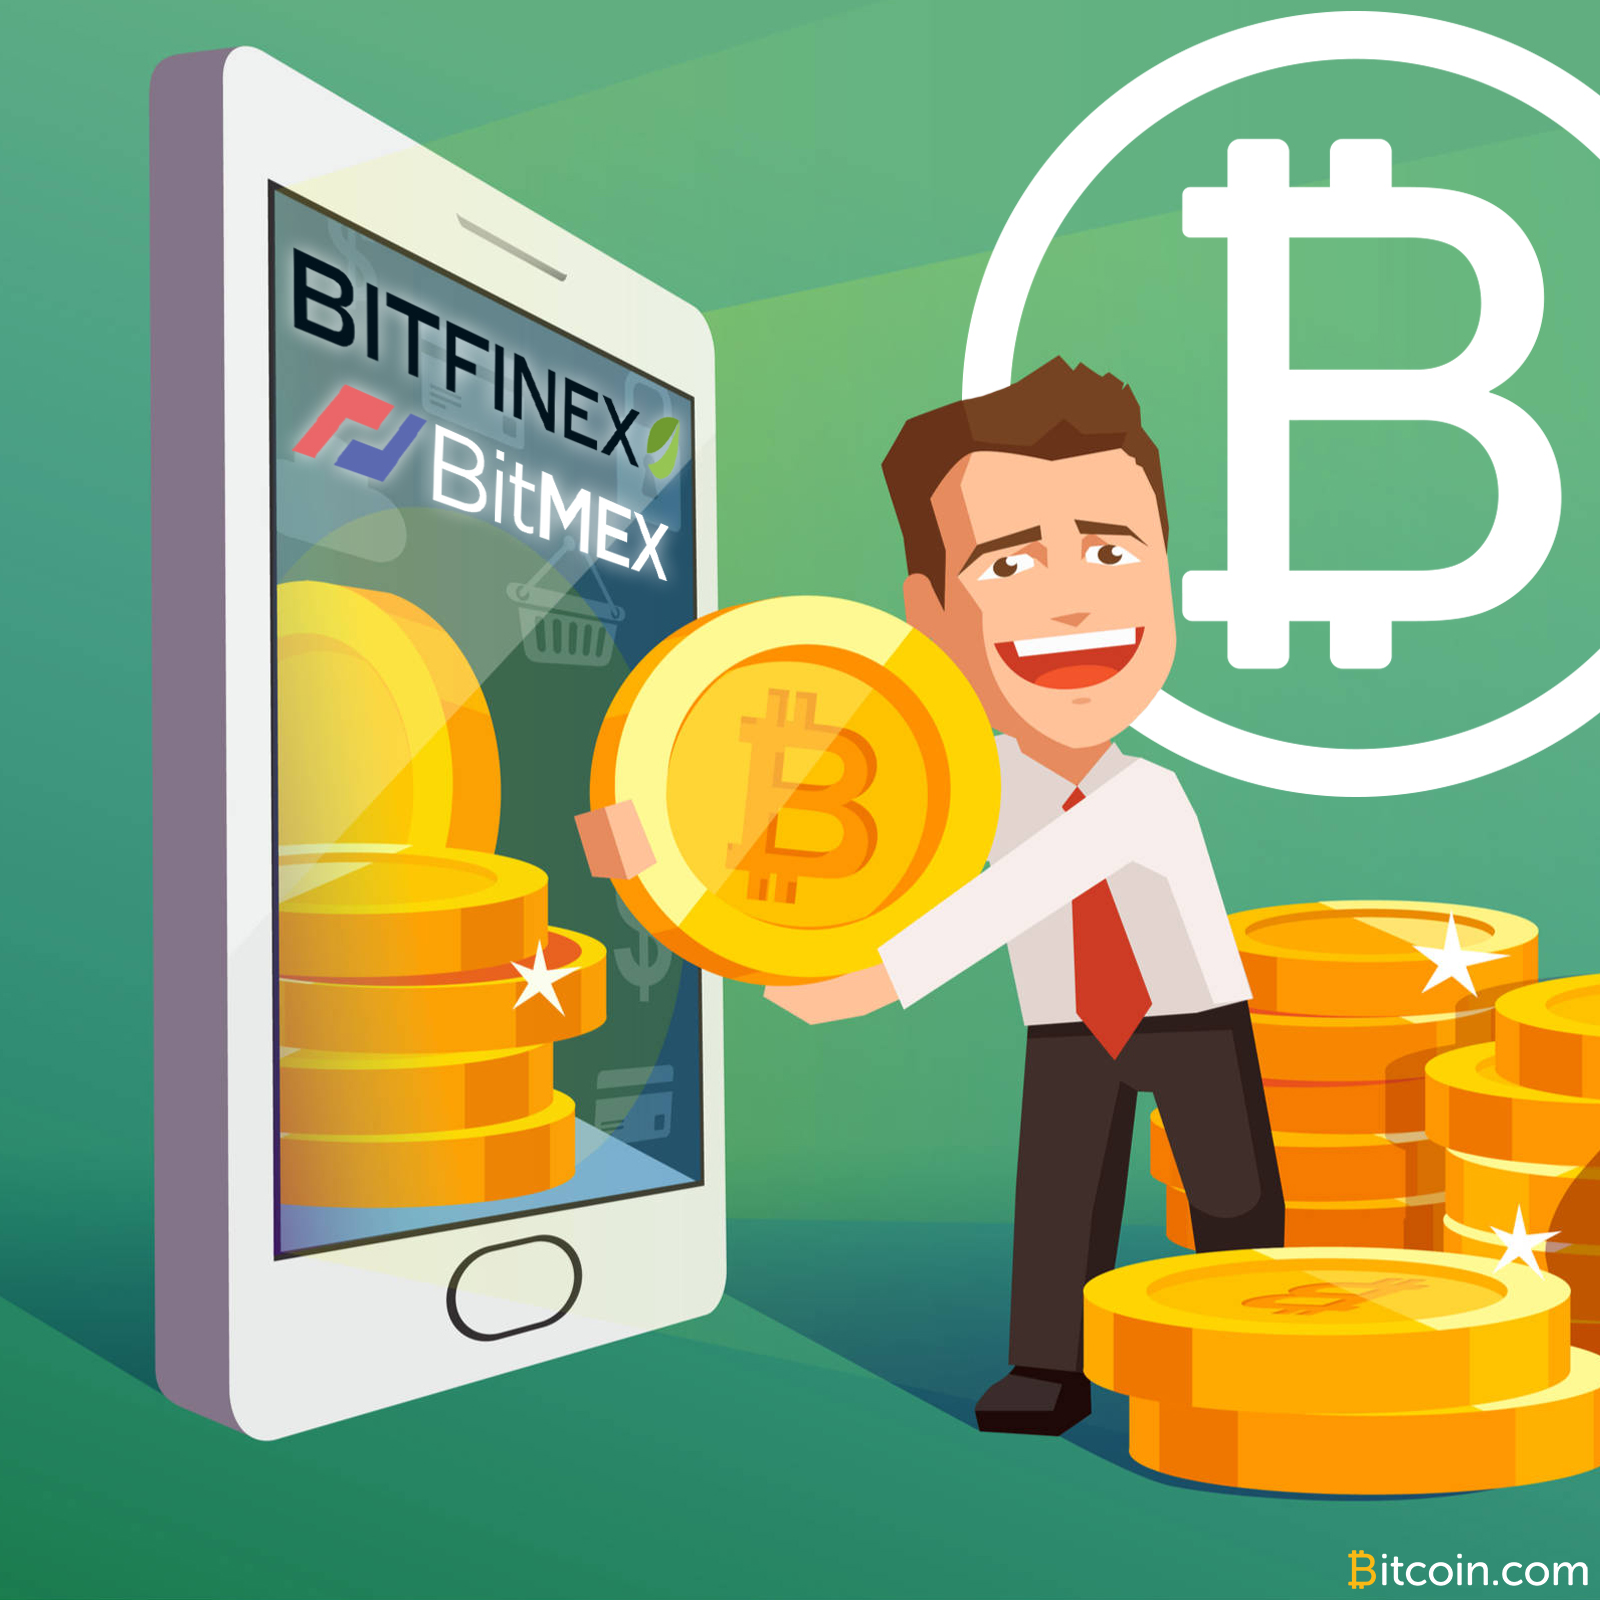 Bitfinex Introduces New Fees, Bitmex Rejects Claims It Trades Against Its Customers